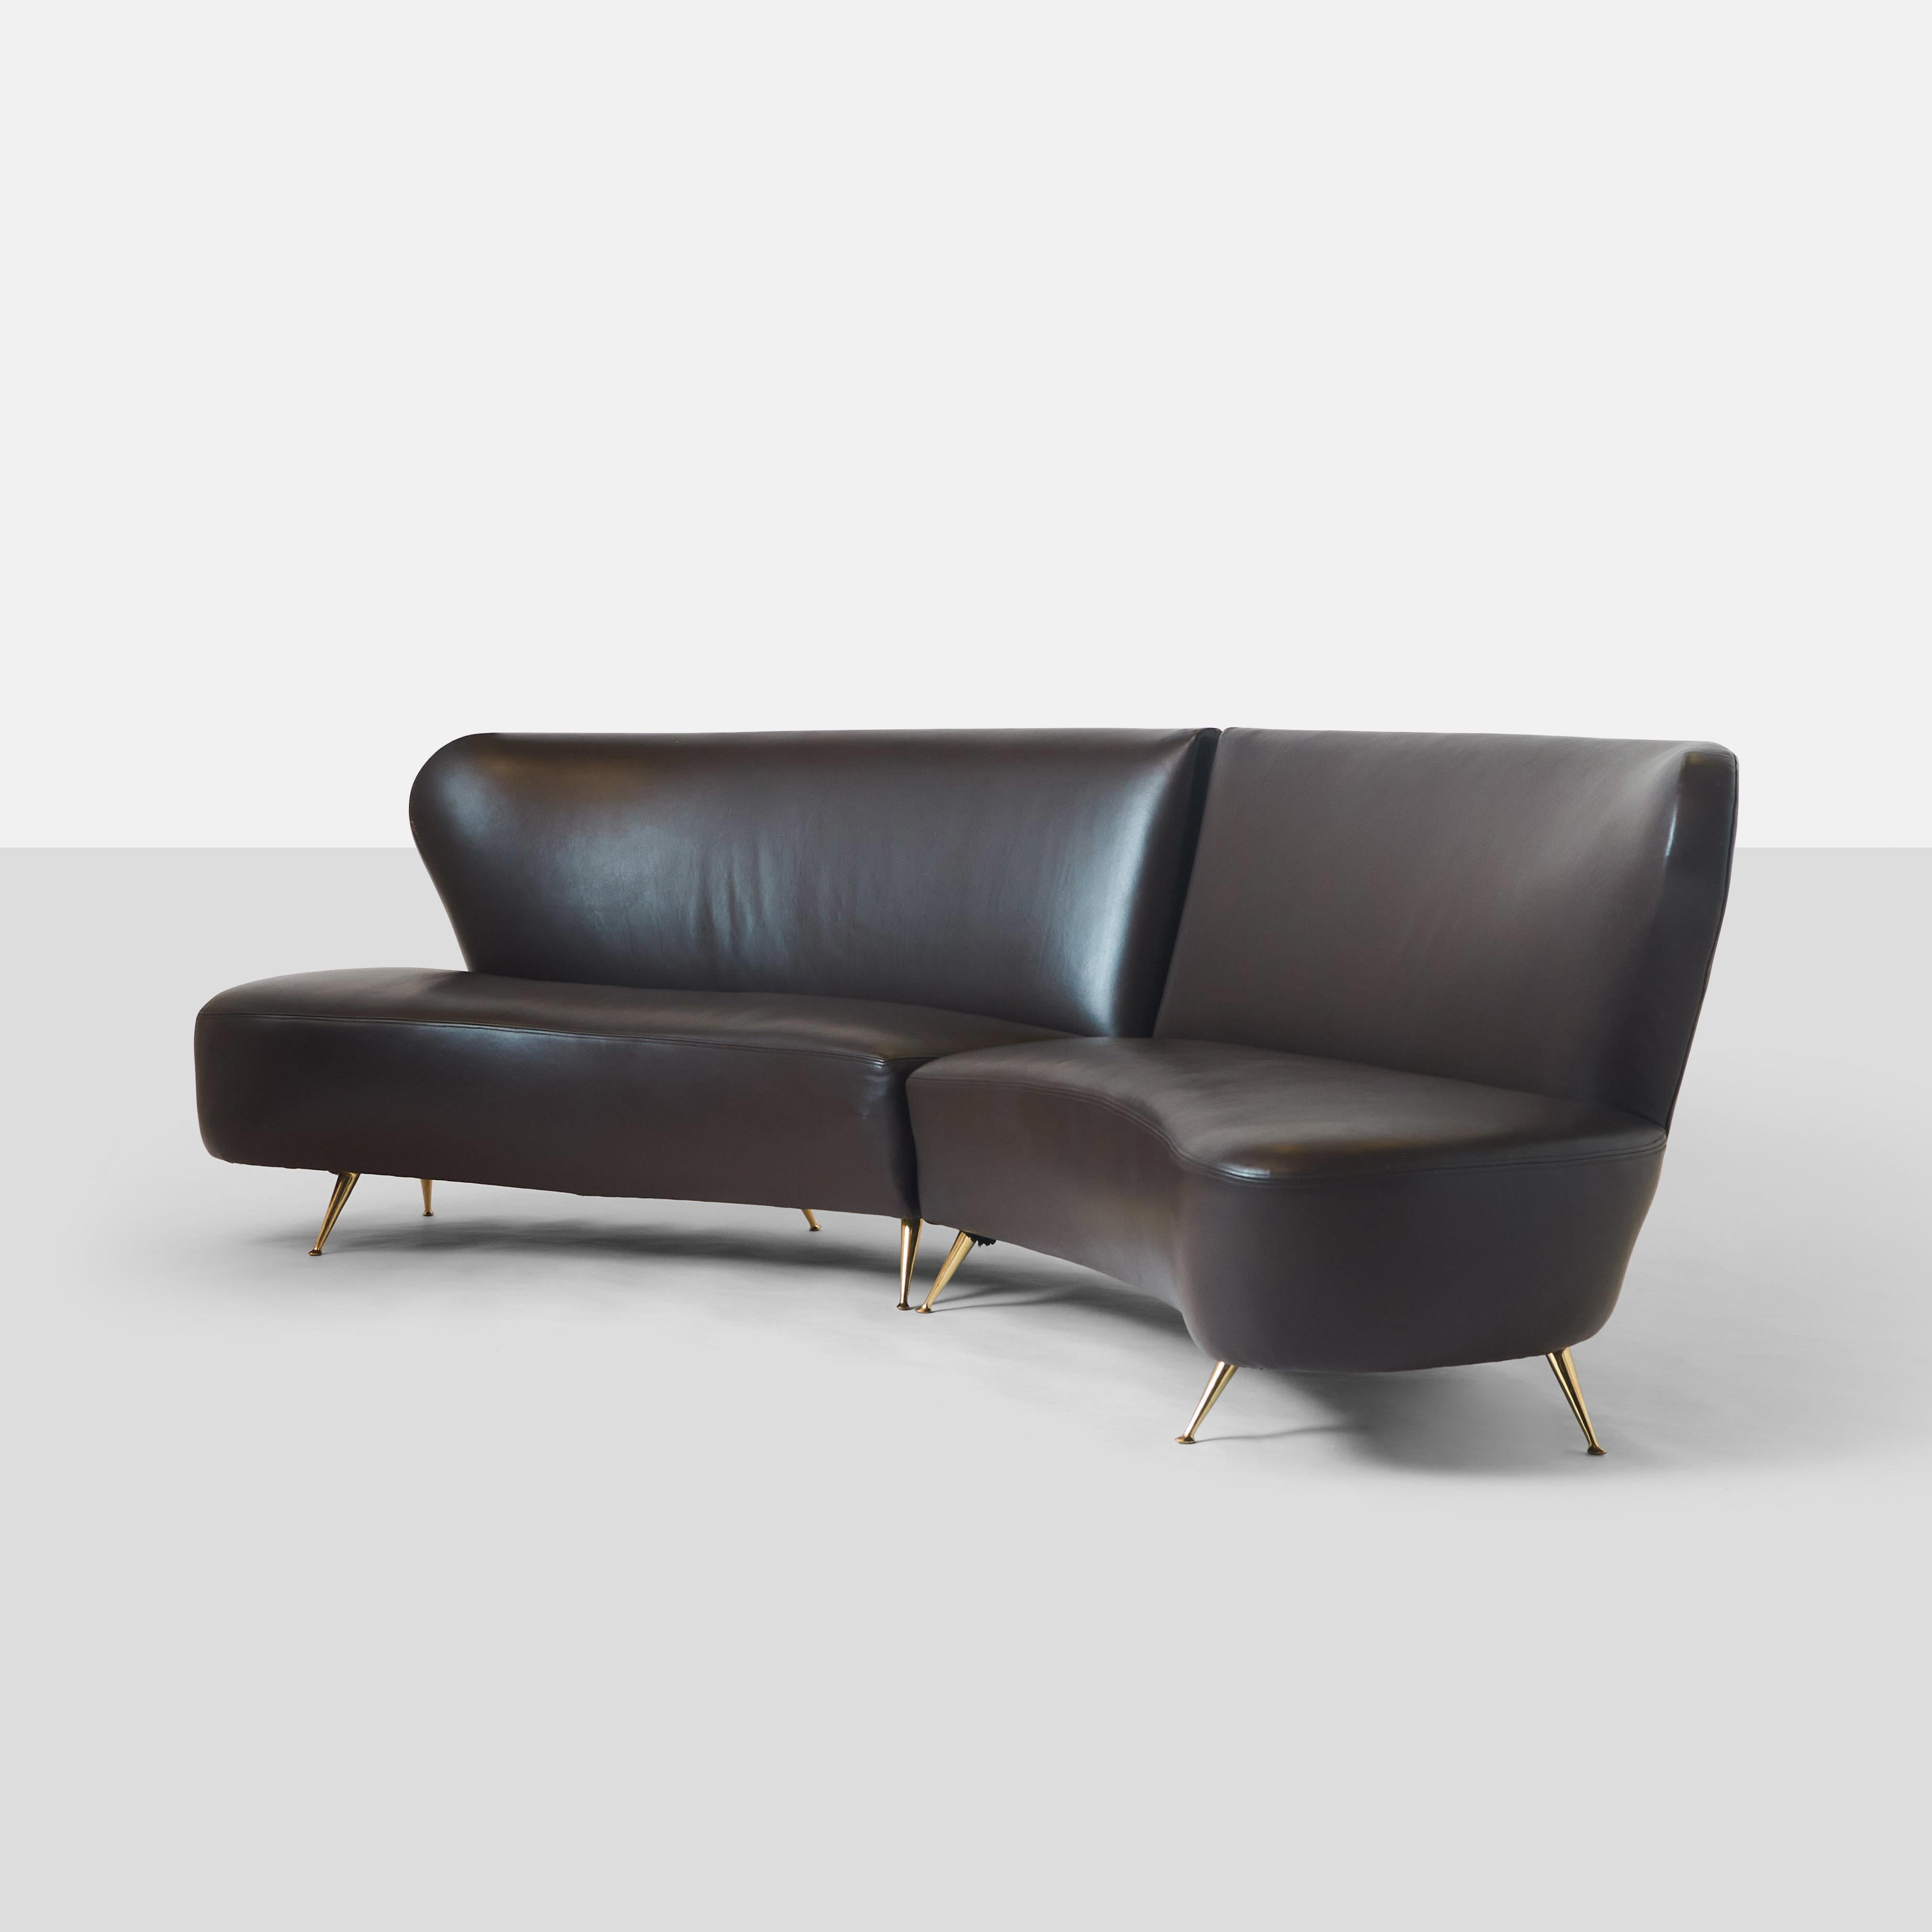 A leather two piece sectional sofa by Carlo di Carli. When placed side by side, the pieces create a gently curved symmetrical sofa. Each section has 5 brass feet, 2 at front and 3 at back.